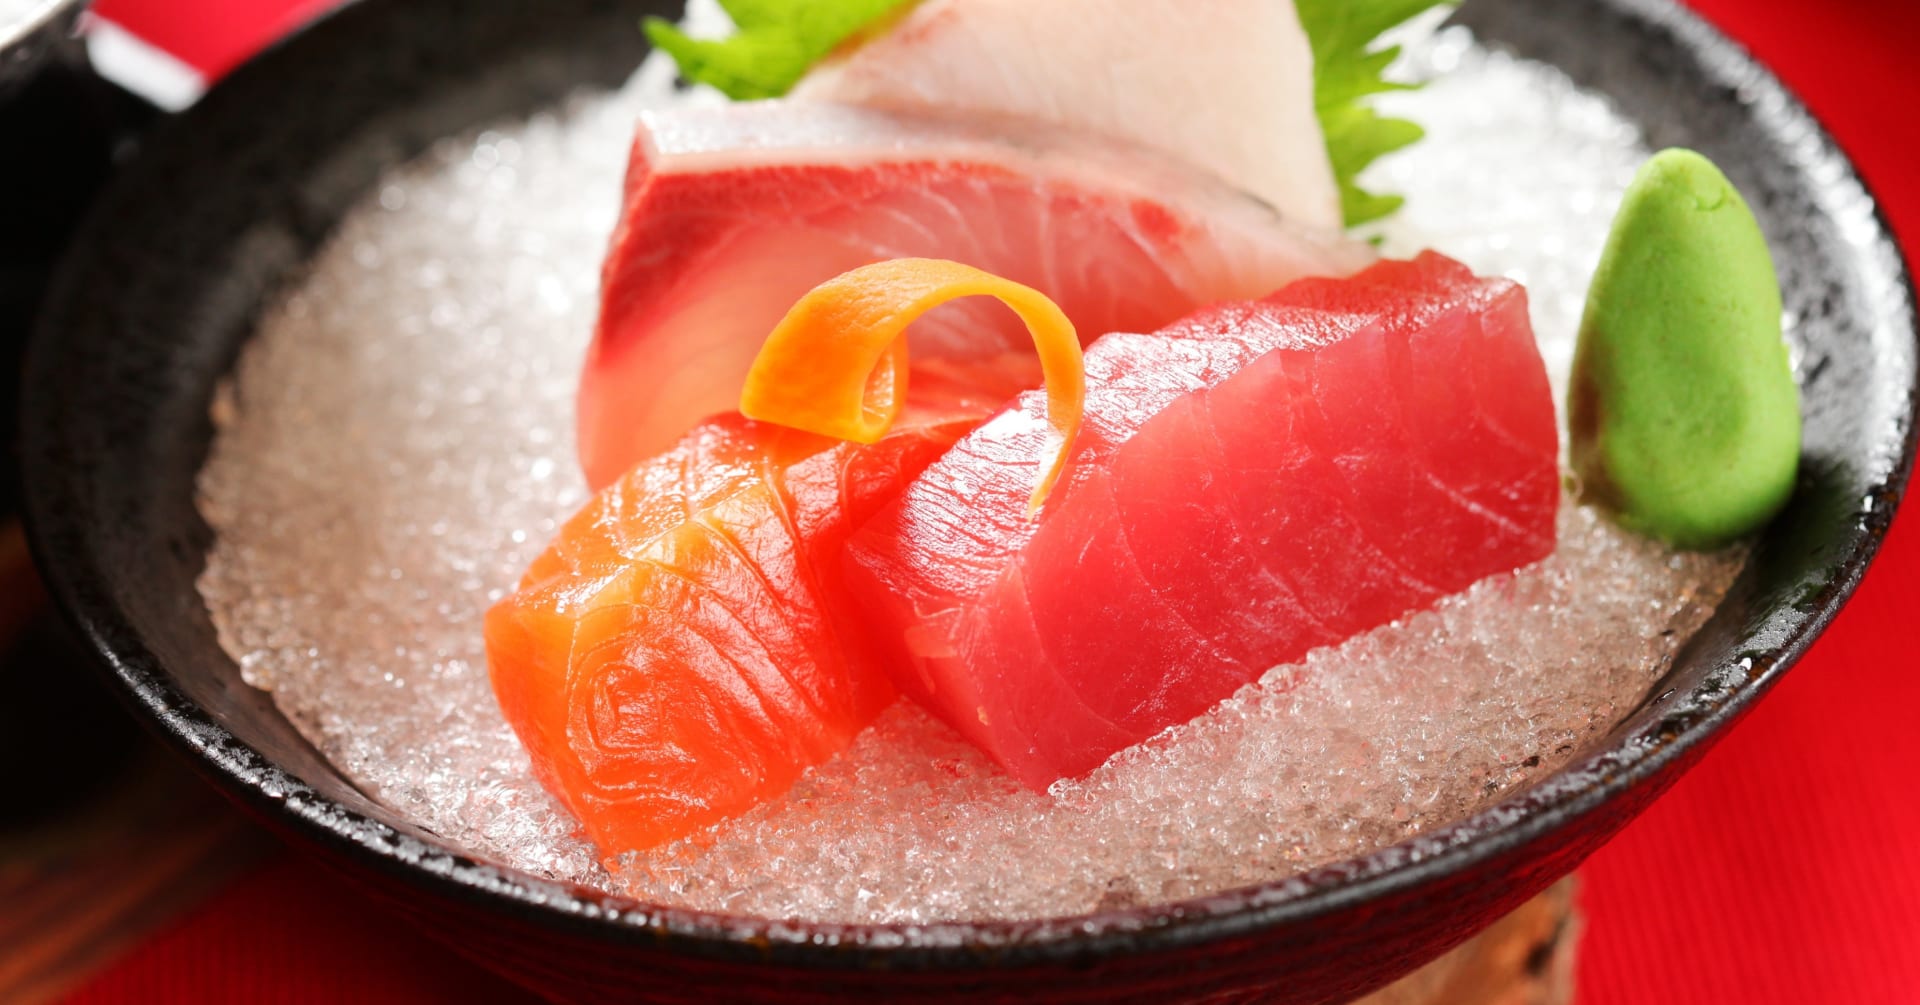 Japan Food Guide: Learning About Japanese Cuisine